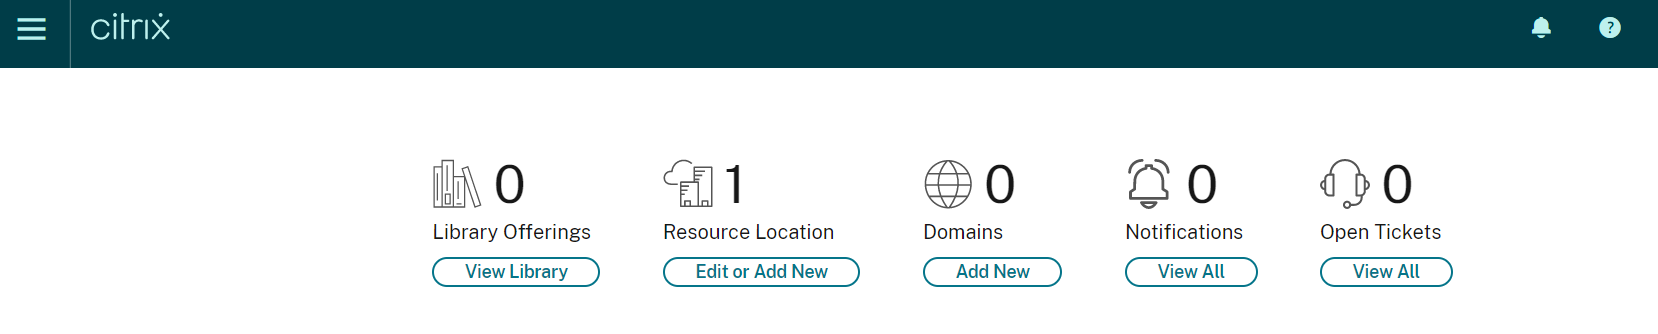 Citrix Virtual Apps and Desktops Add or Edit Resource Location